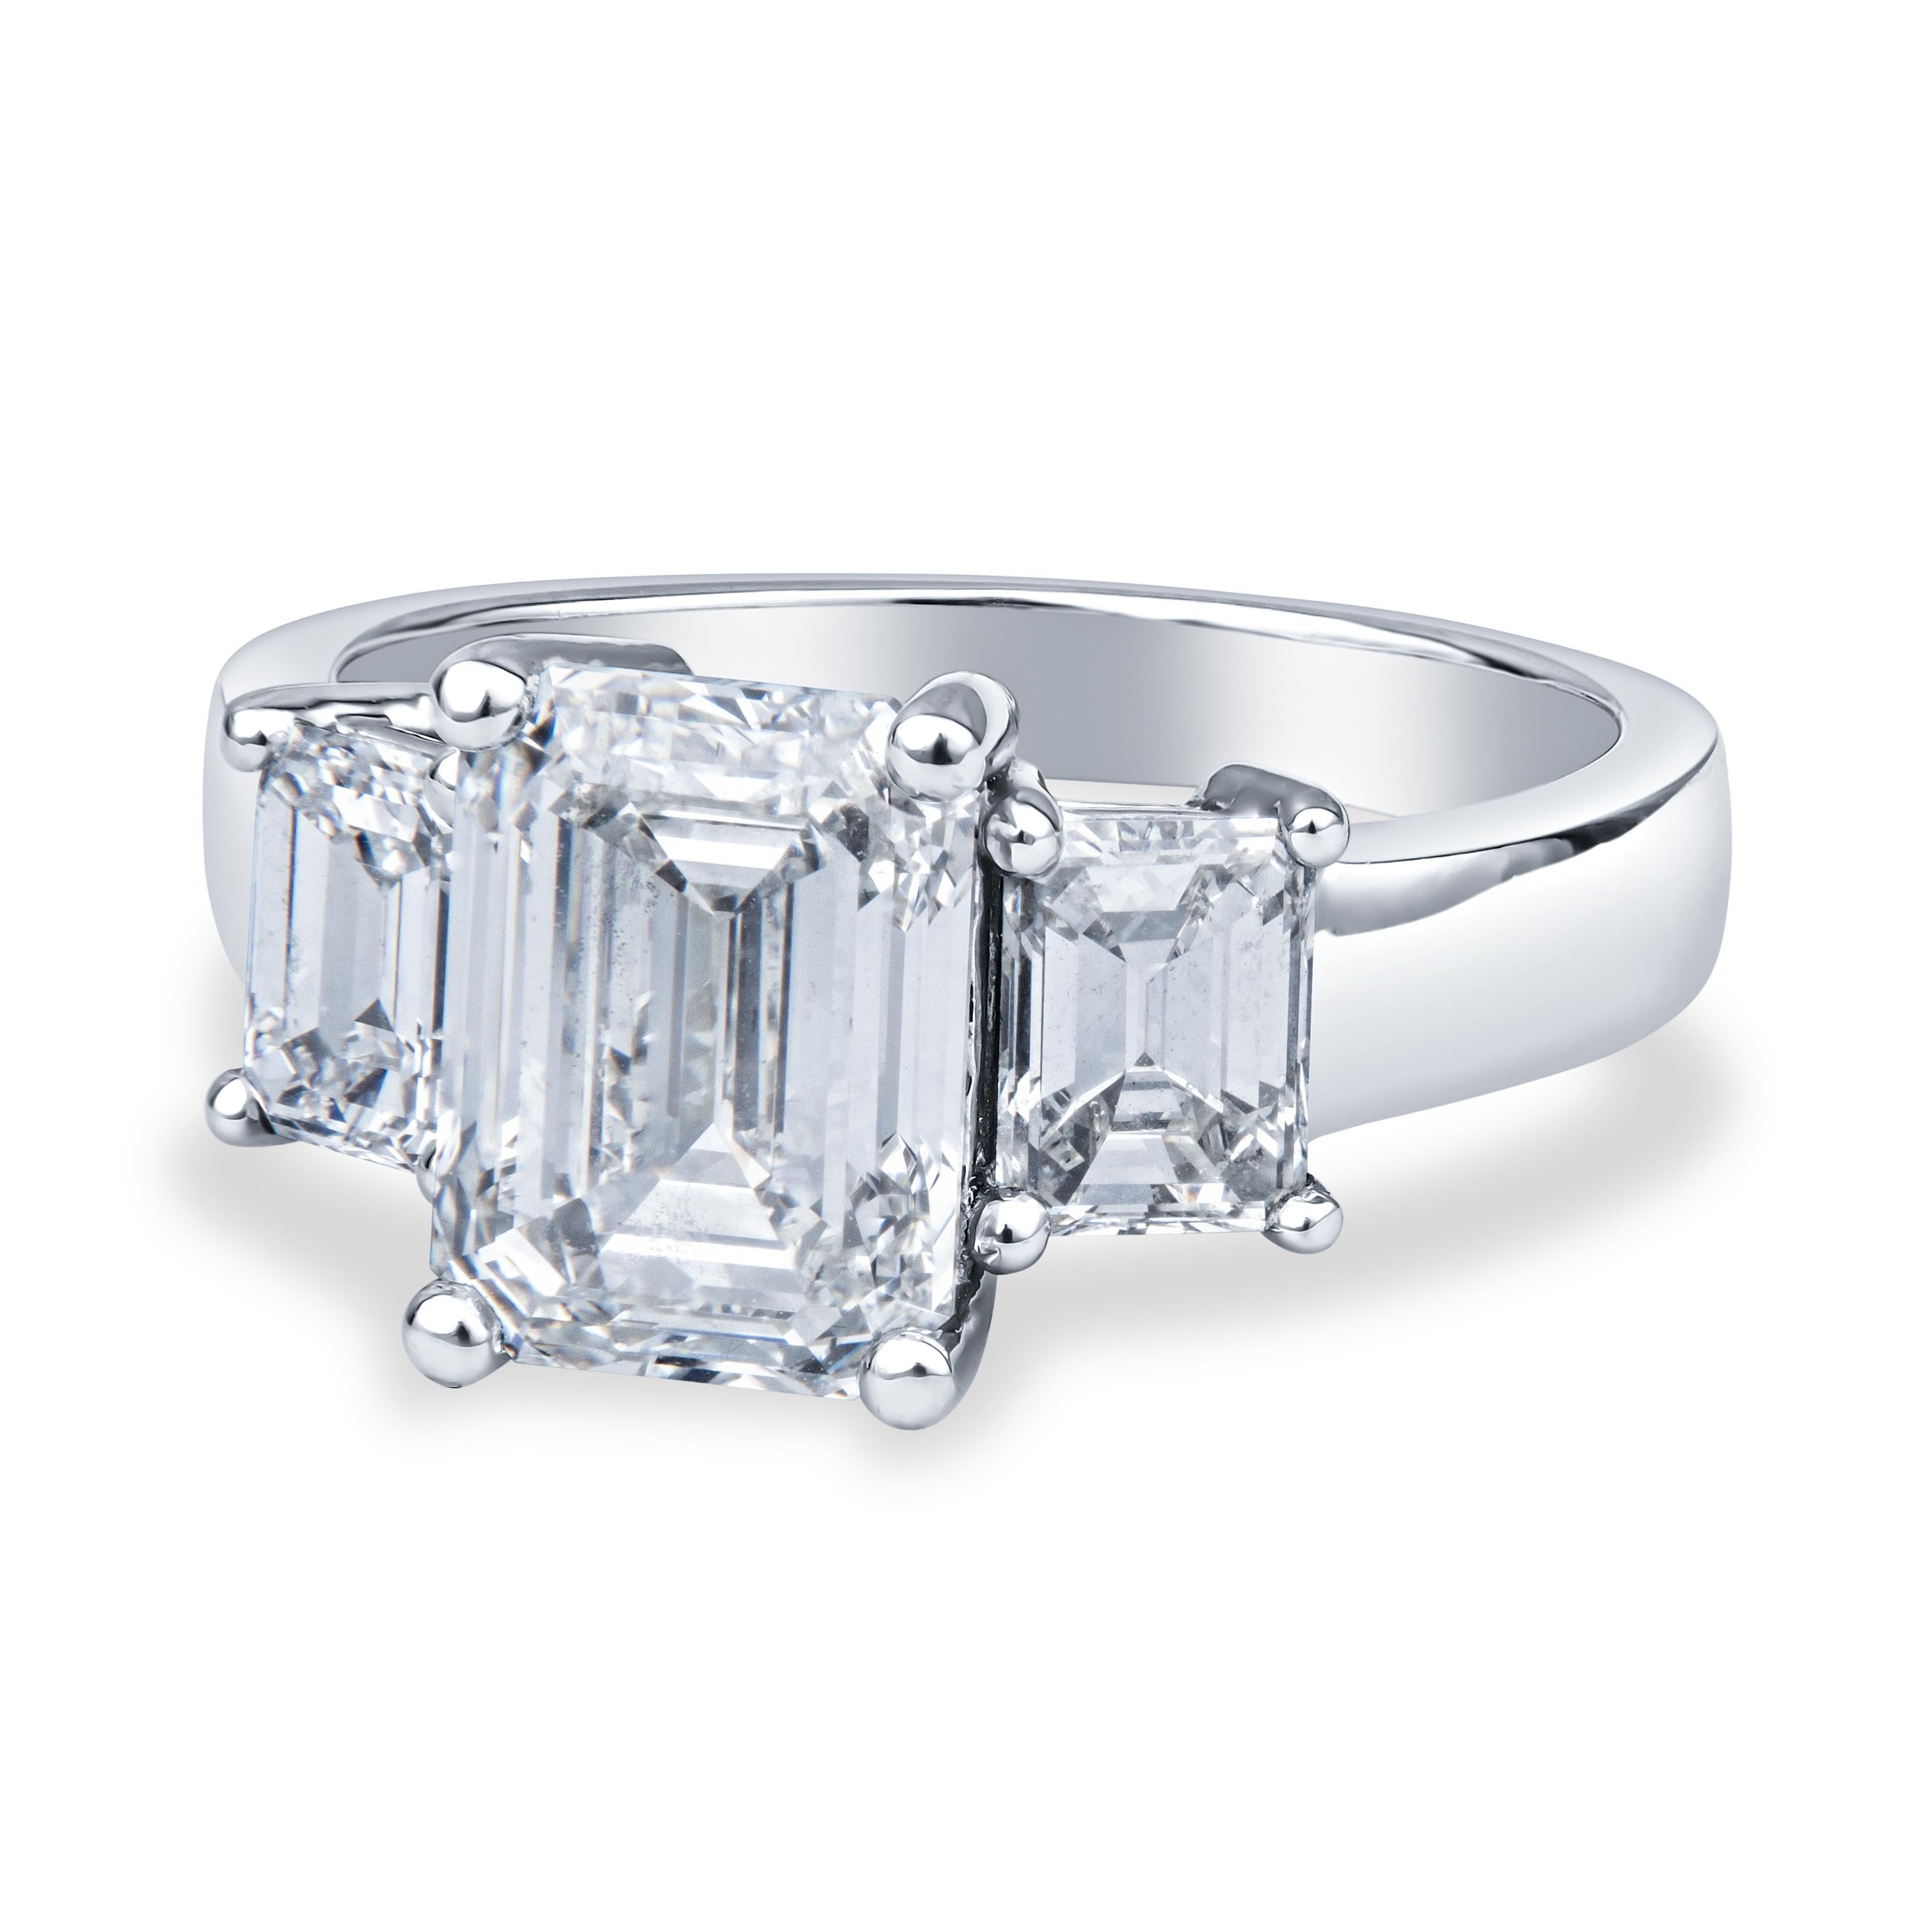 This stunning engagement ring features a 2.80ct, I VS1, emerald cut diamond in the center (GIA  3295775731), bordered by two 1.20ctw emerald cut side stones and set in a 5.25 platinum ring, which may be resized upon request.